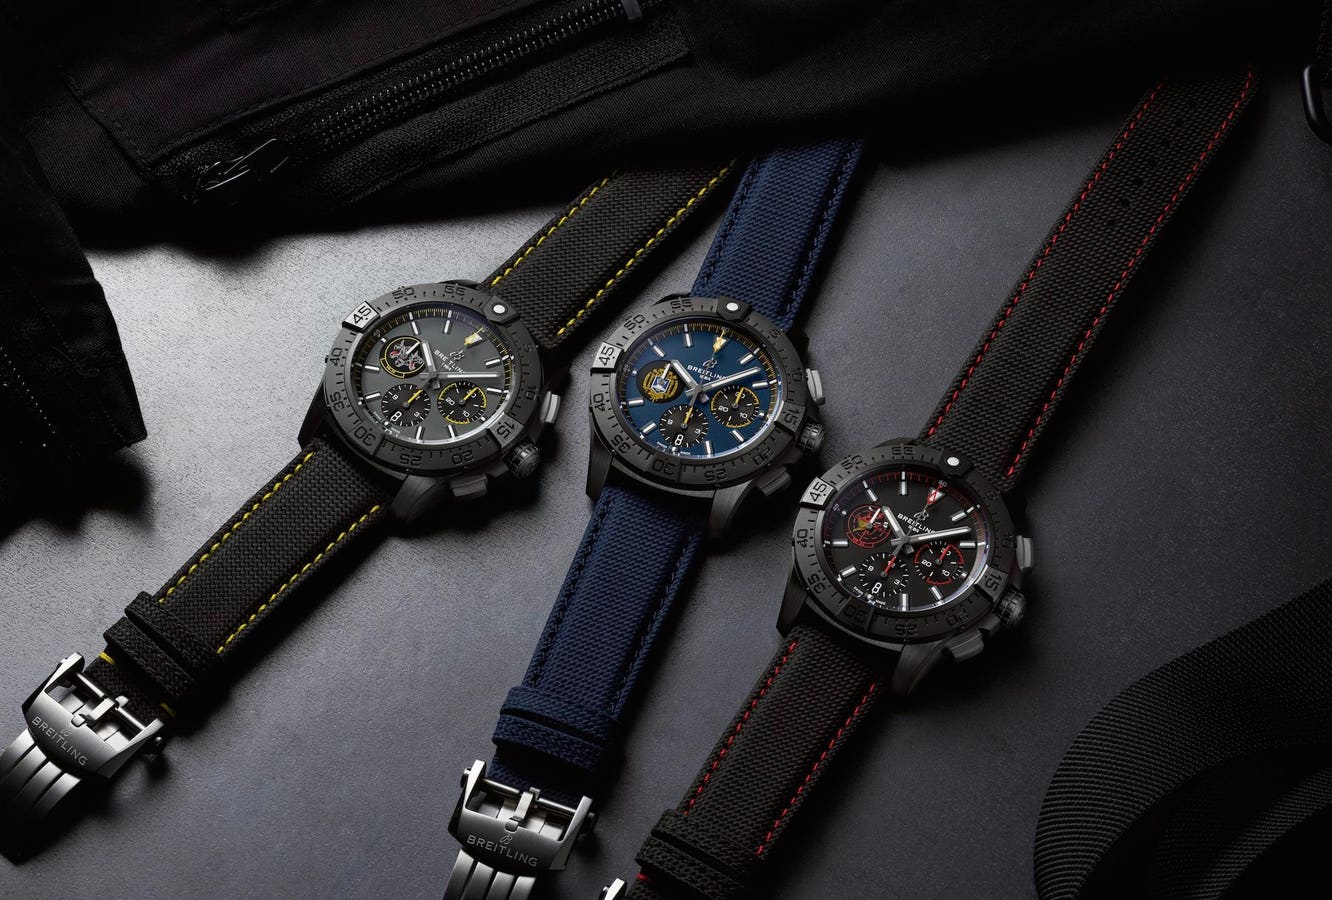 New Breitling Watches Have Got You Covered